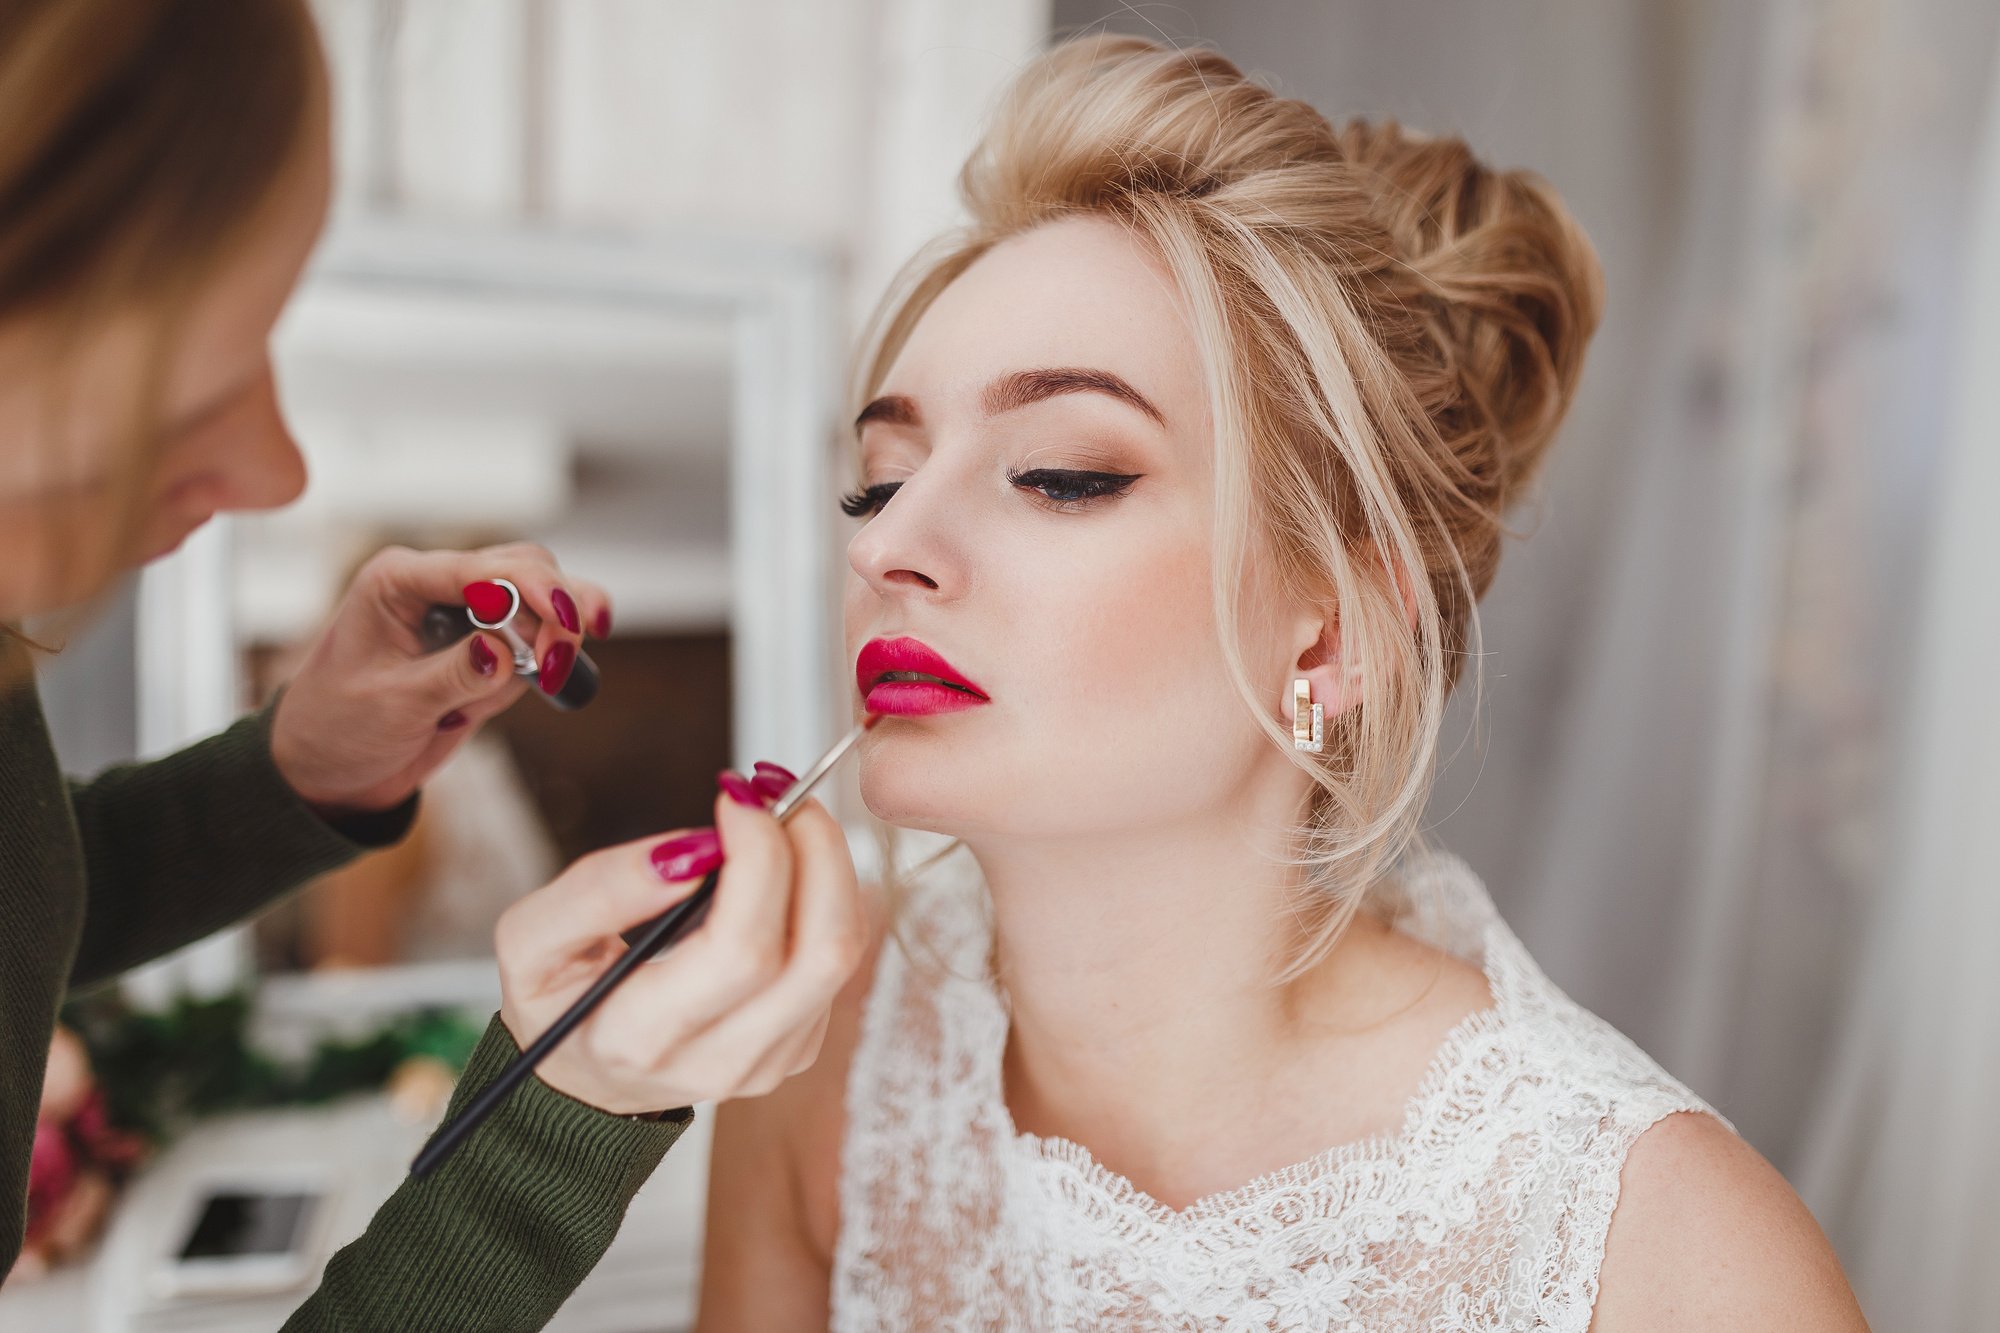 Airbrush Makeup vs. Regular Makeup: Experts Weigh In on the Difference